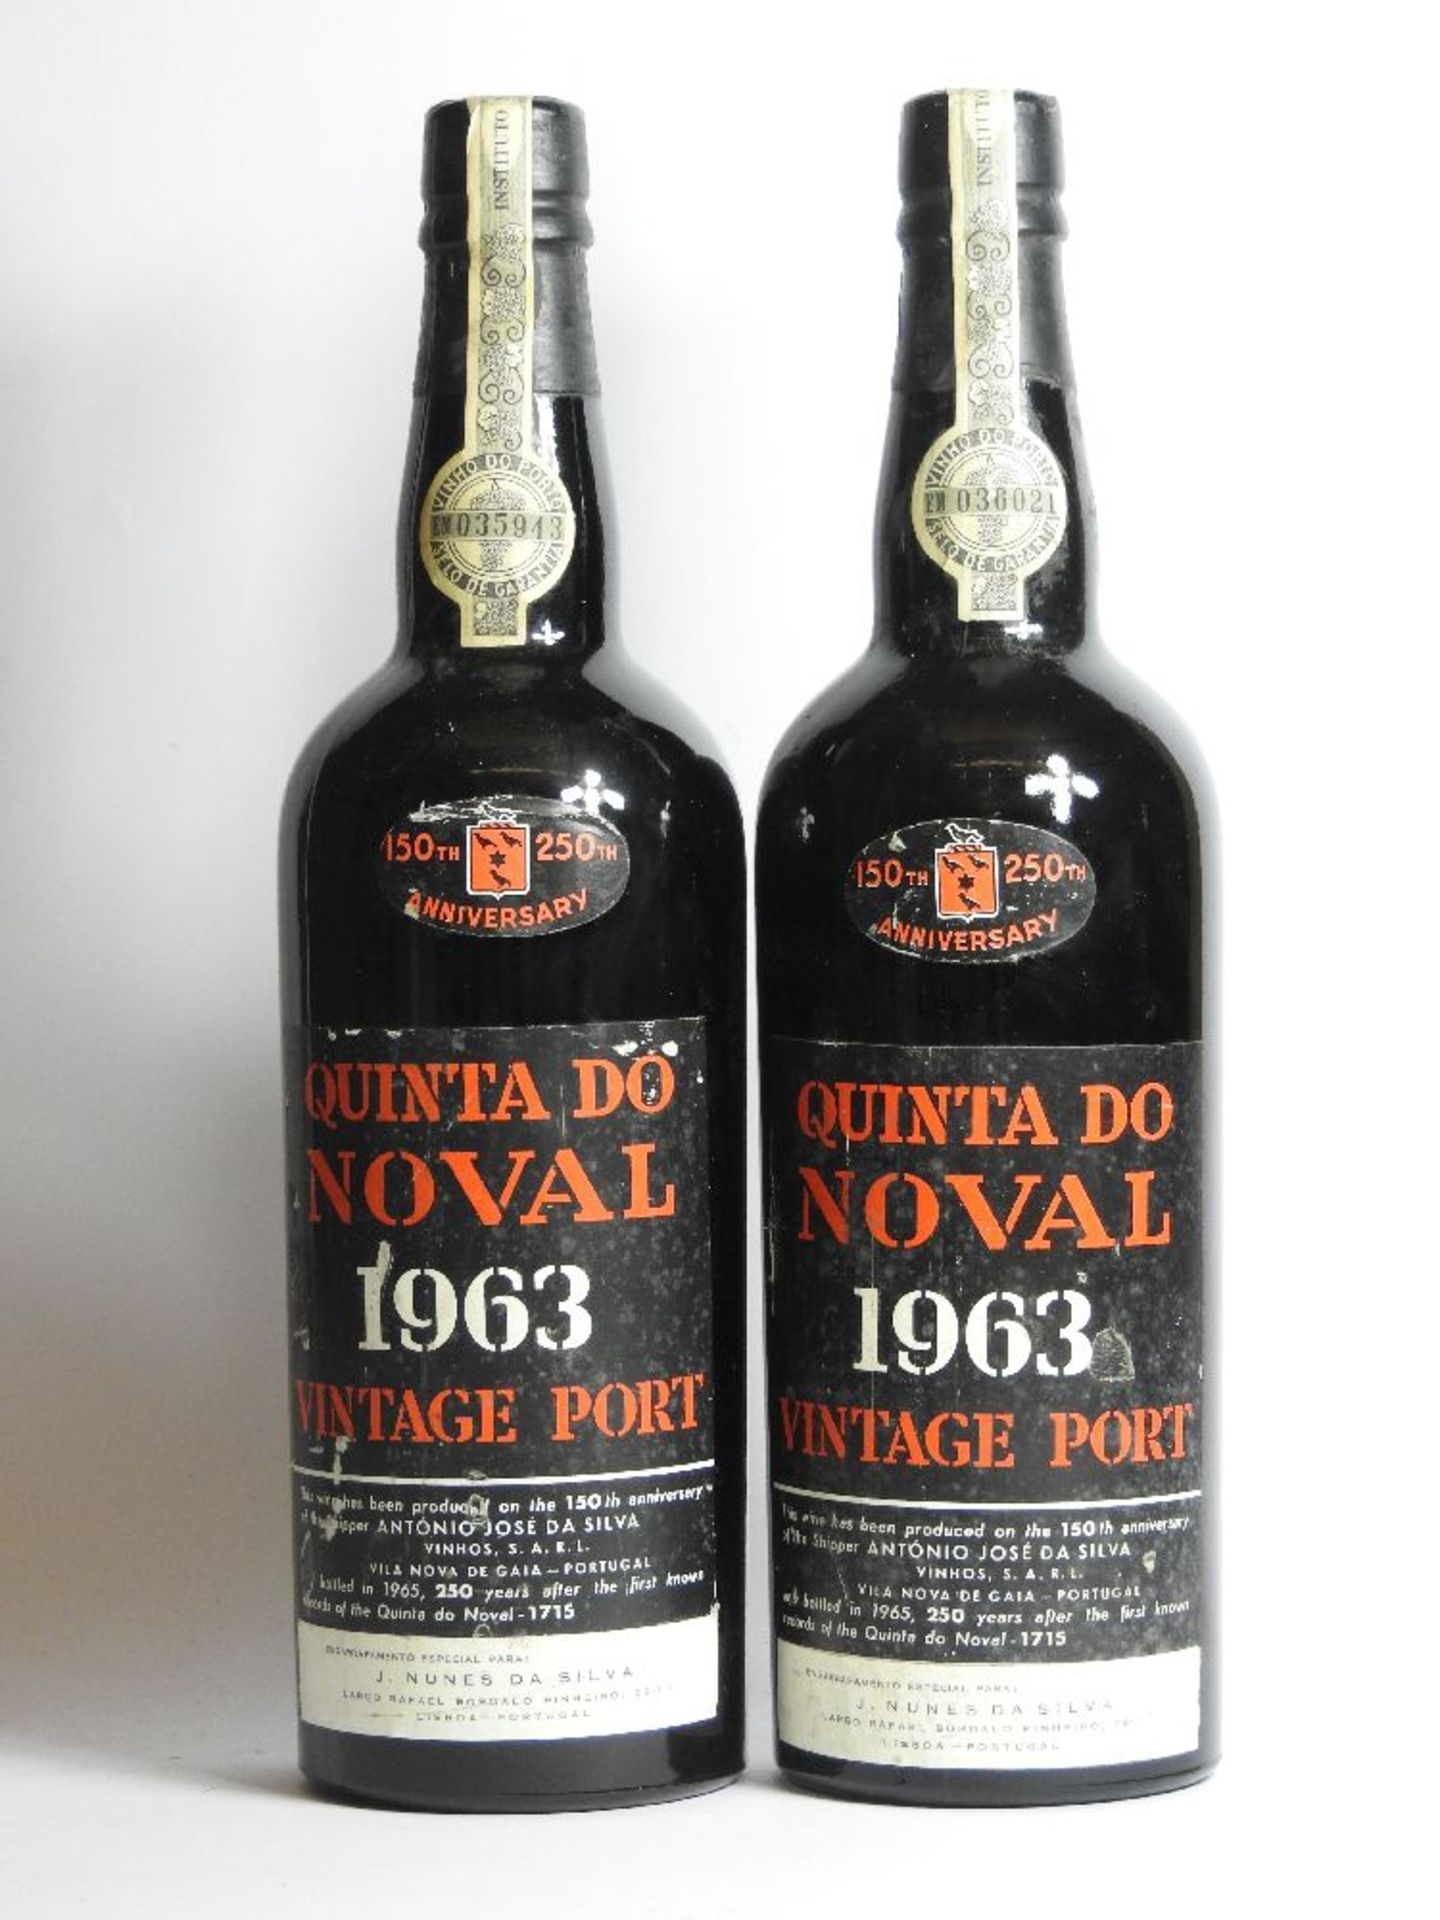 Quinta do Noval, 150th-250th Anniversary, 1963, two bottles